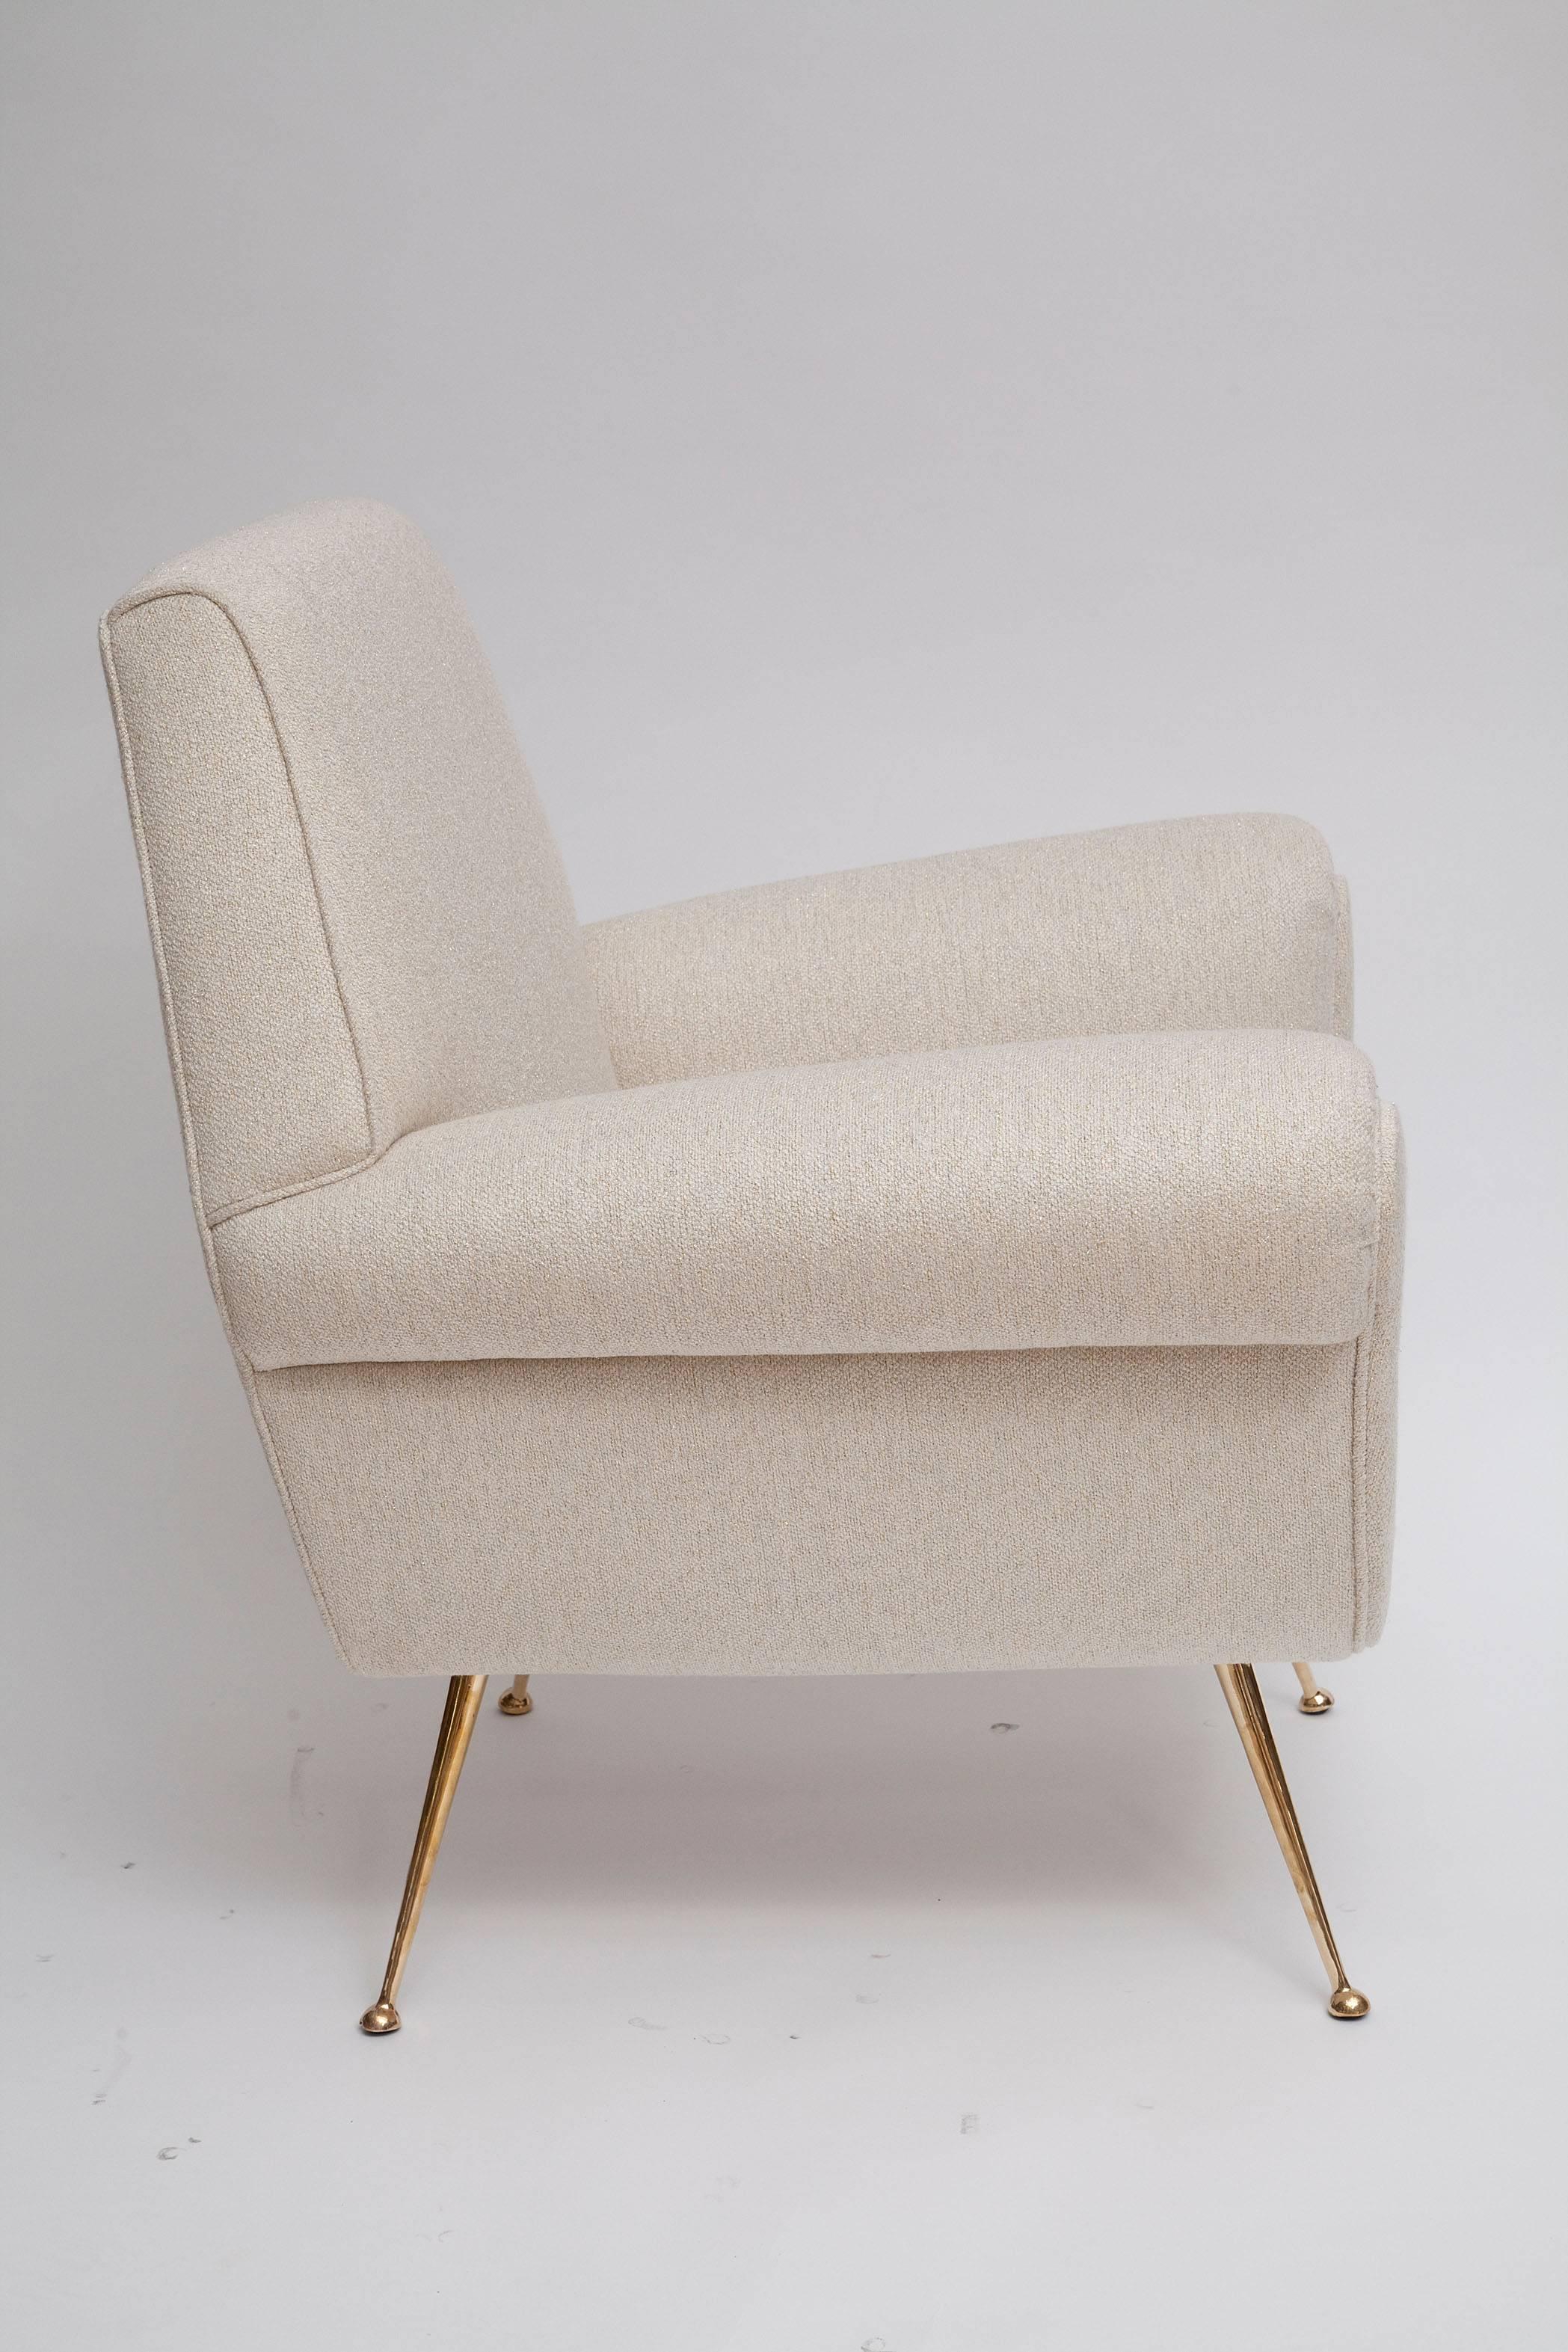 Exceptional pair of 1950s Italian lounge chairs by Gigi Radice for Minotti. Fully restored and meticulously upholstered with all new foam in creamy cotton upholstery shot through with shimmering gold lurex. Polished solid brass legs. Turn the lights